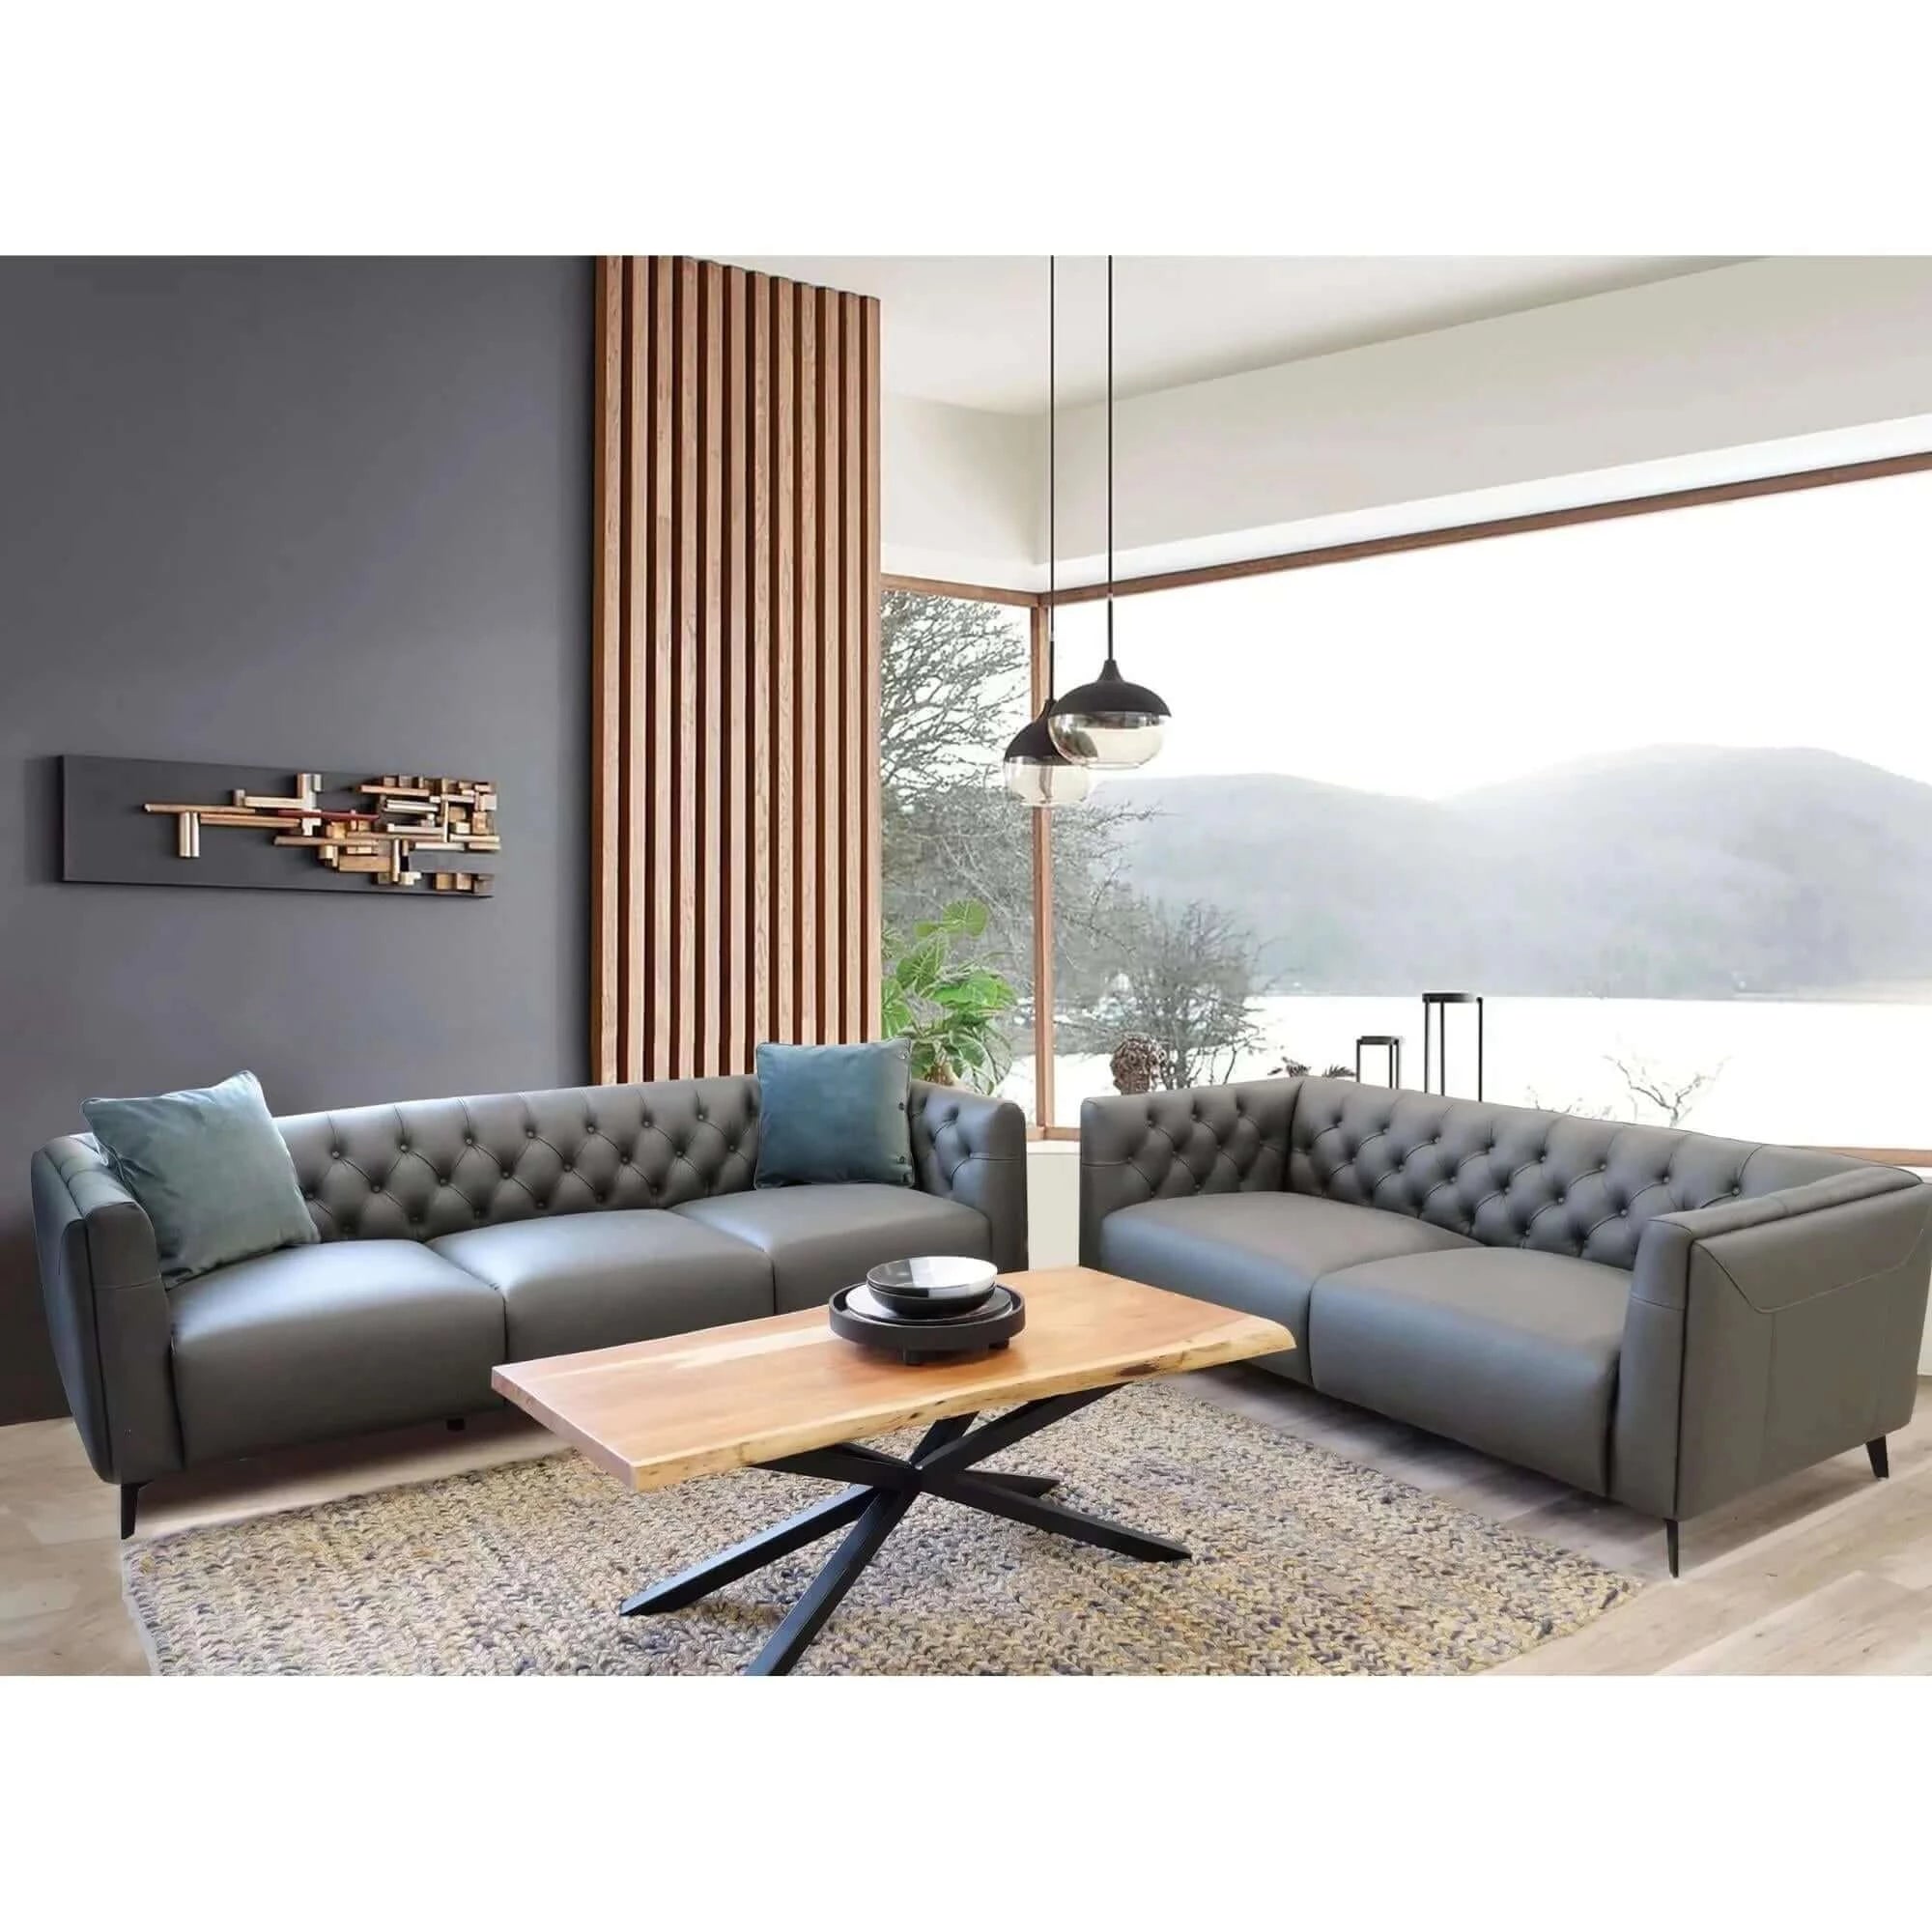 Buy luxe genuine forli leather sofa 2.5 seater upholstered lounge couch - dark grey - upinteriors-Upinteriors